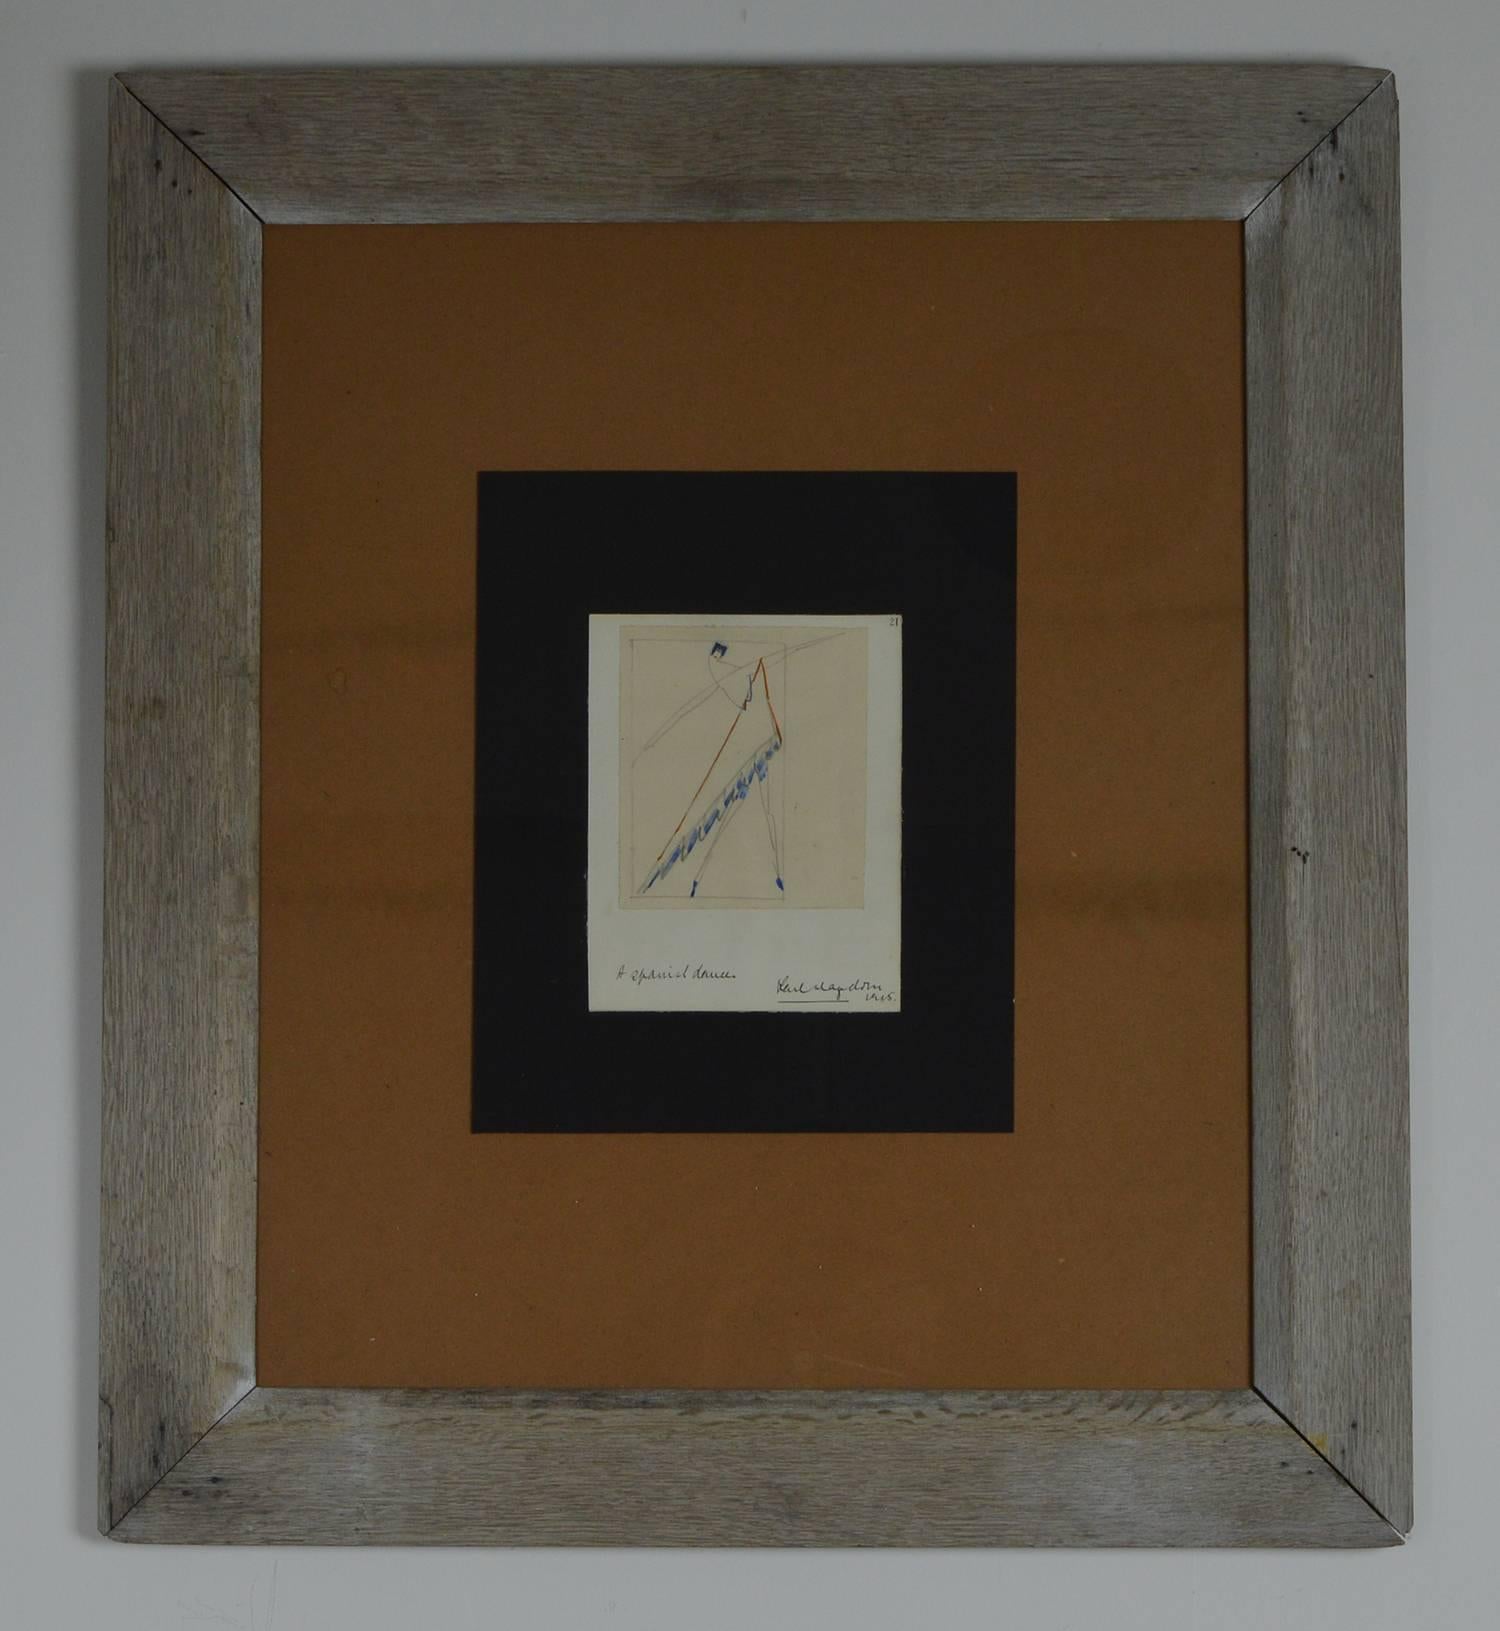 Wonderful drawing of a Spanish dancer by Karl Hagedorn

Displaying the characteristic Futurist, cubist and Bauhaus influences reminiscent of his early work.

Signed and dated 1915.

Tastefully presented in an antique distressed oak frame. The